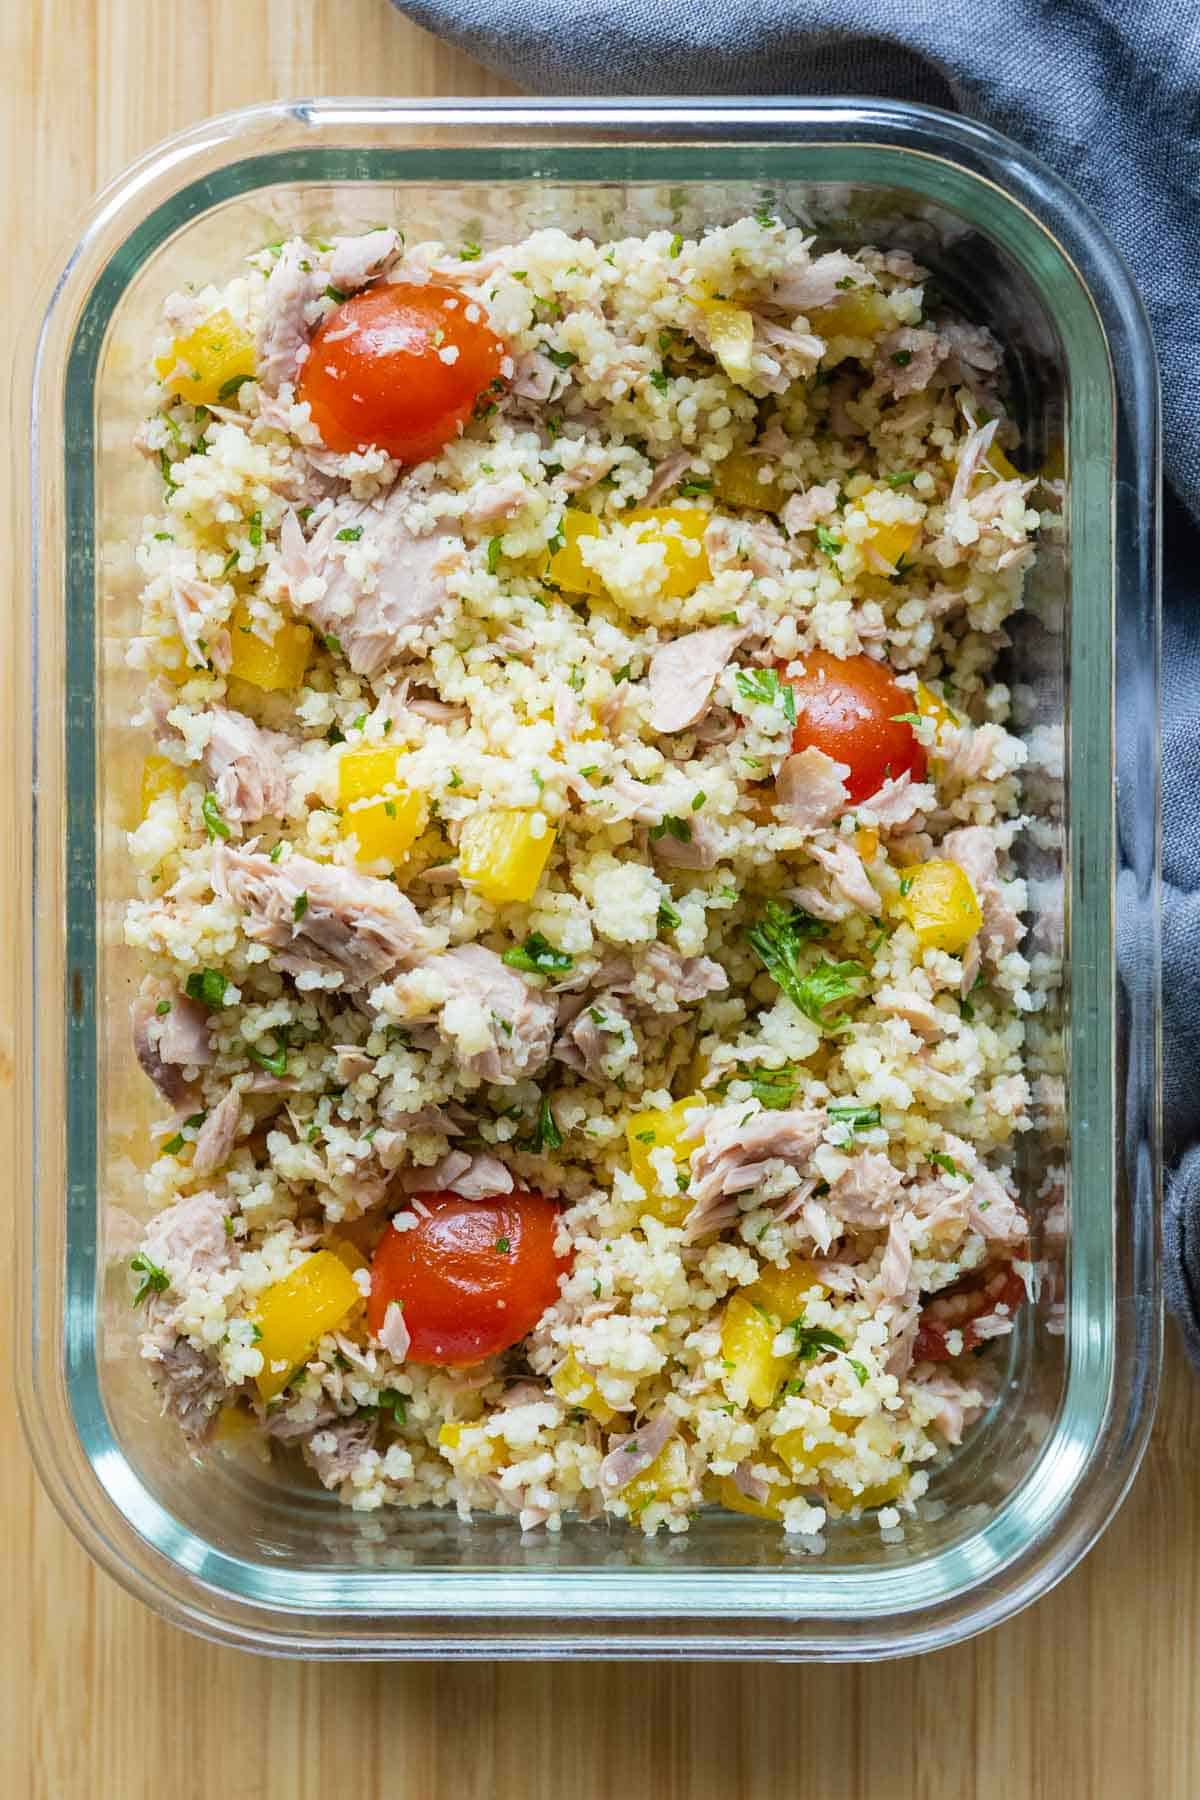 Glass container with a mix of couscous, tuna, and vegetables.